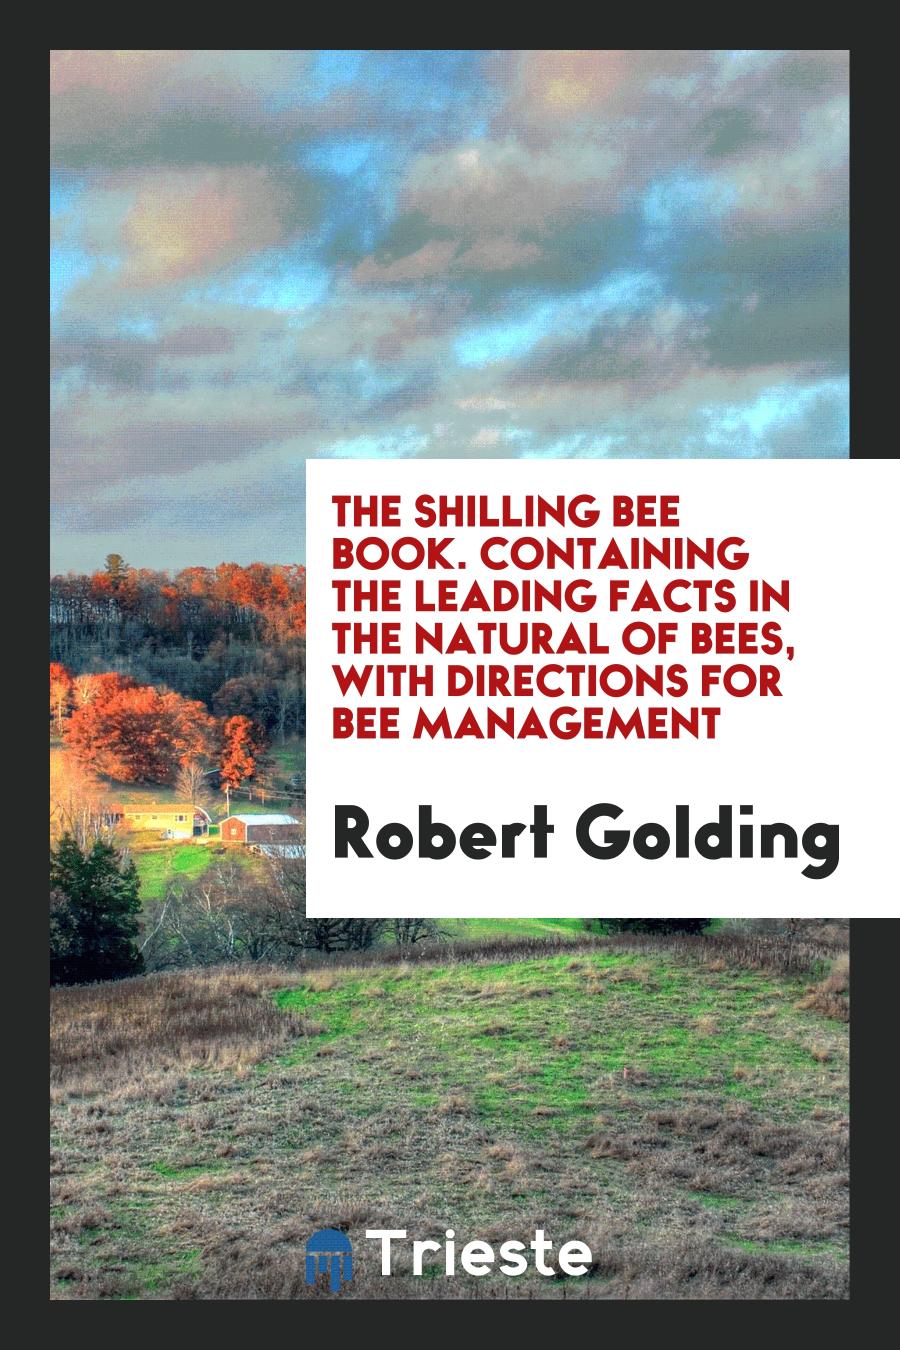 The shilling bee book. Containing the leading facts in the natural of bees, with directions for bee management